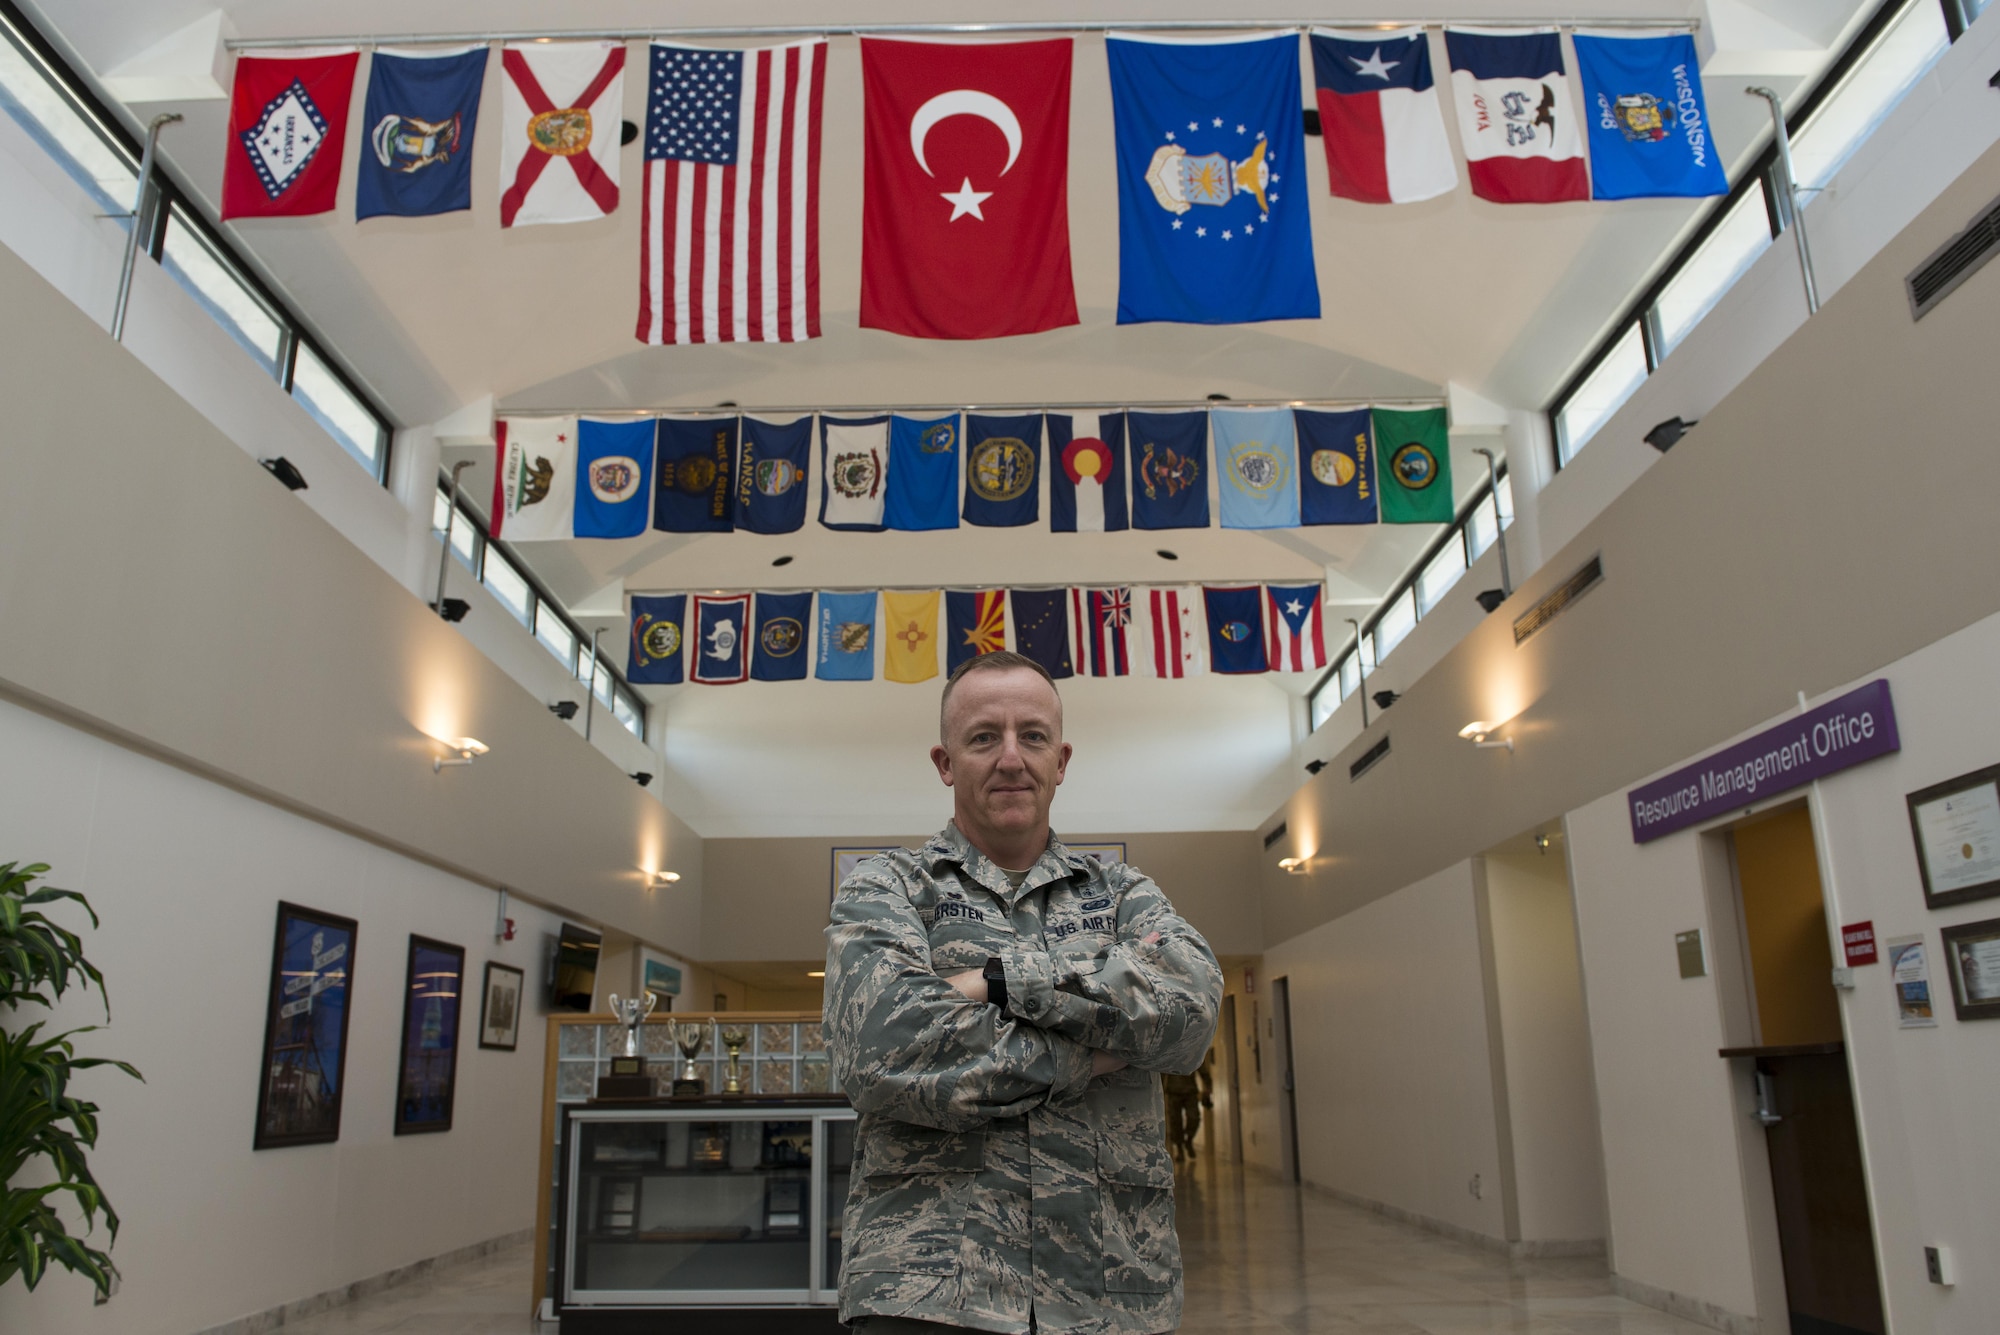 U.S. Air Force Lt. Col. Michael Kersten, 39th Medical Support Squadron (MDSS) commander, poses for a photo inside the medical facility Aug. 23, 2016, at Incirlik Air Base, Turkey. The 39th MDSS provides preventative and clinical health and wellness services for U.S. and coalition forces. (U.S. Air Force photo by Senior Airman John Nieves Camacho)